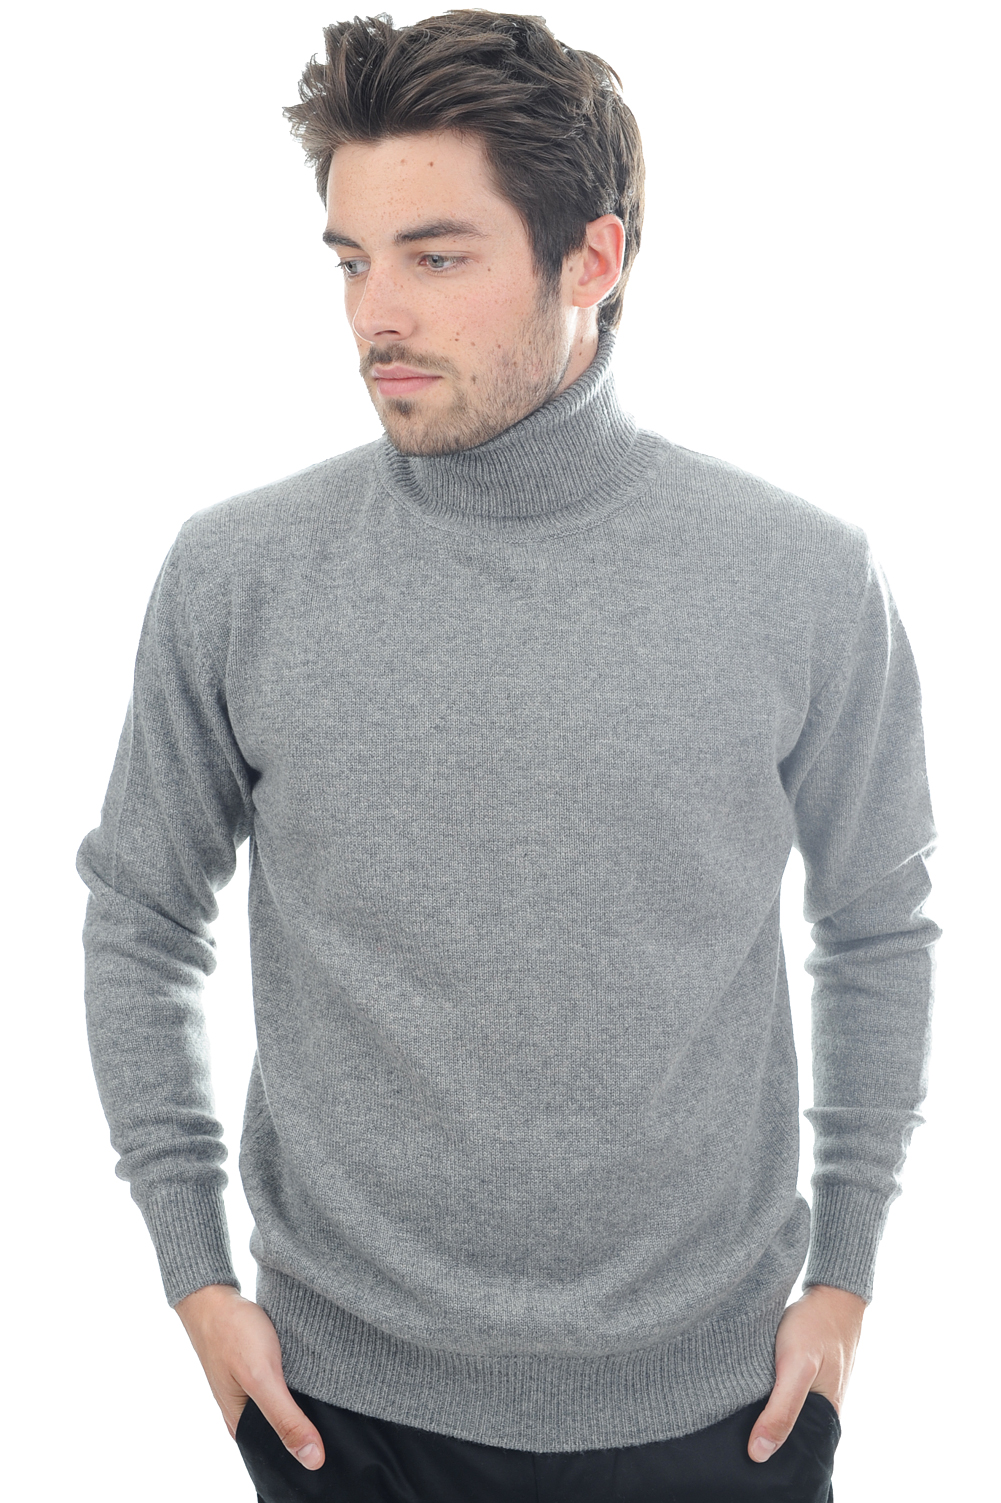 Cachemire pull homme col roule edgar 4f gris chine 2xl